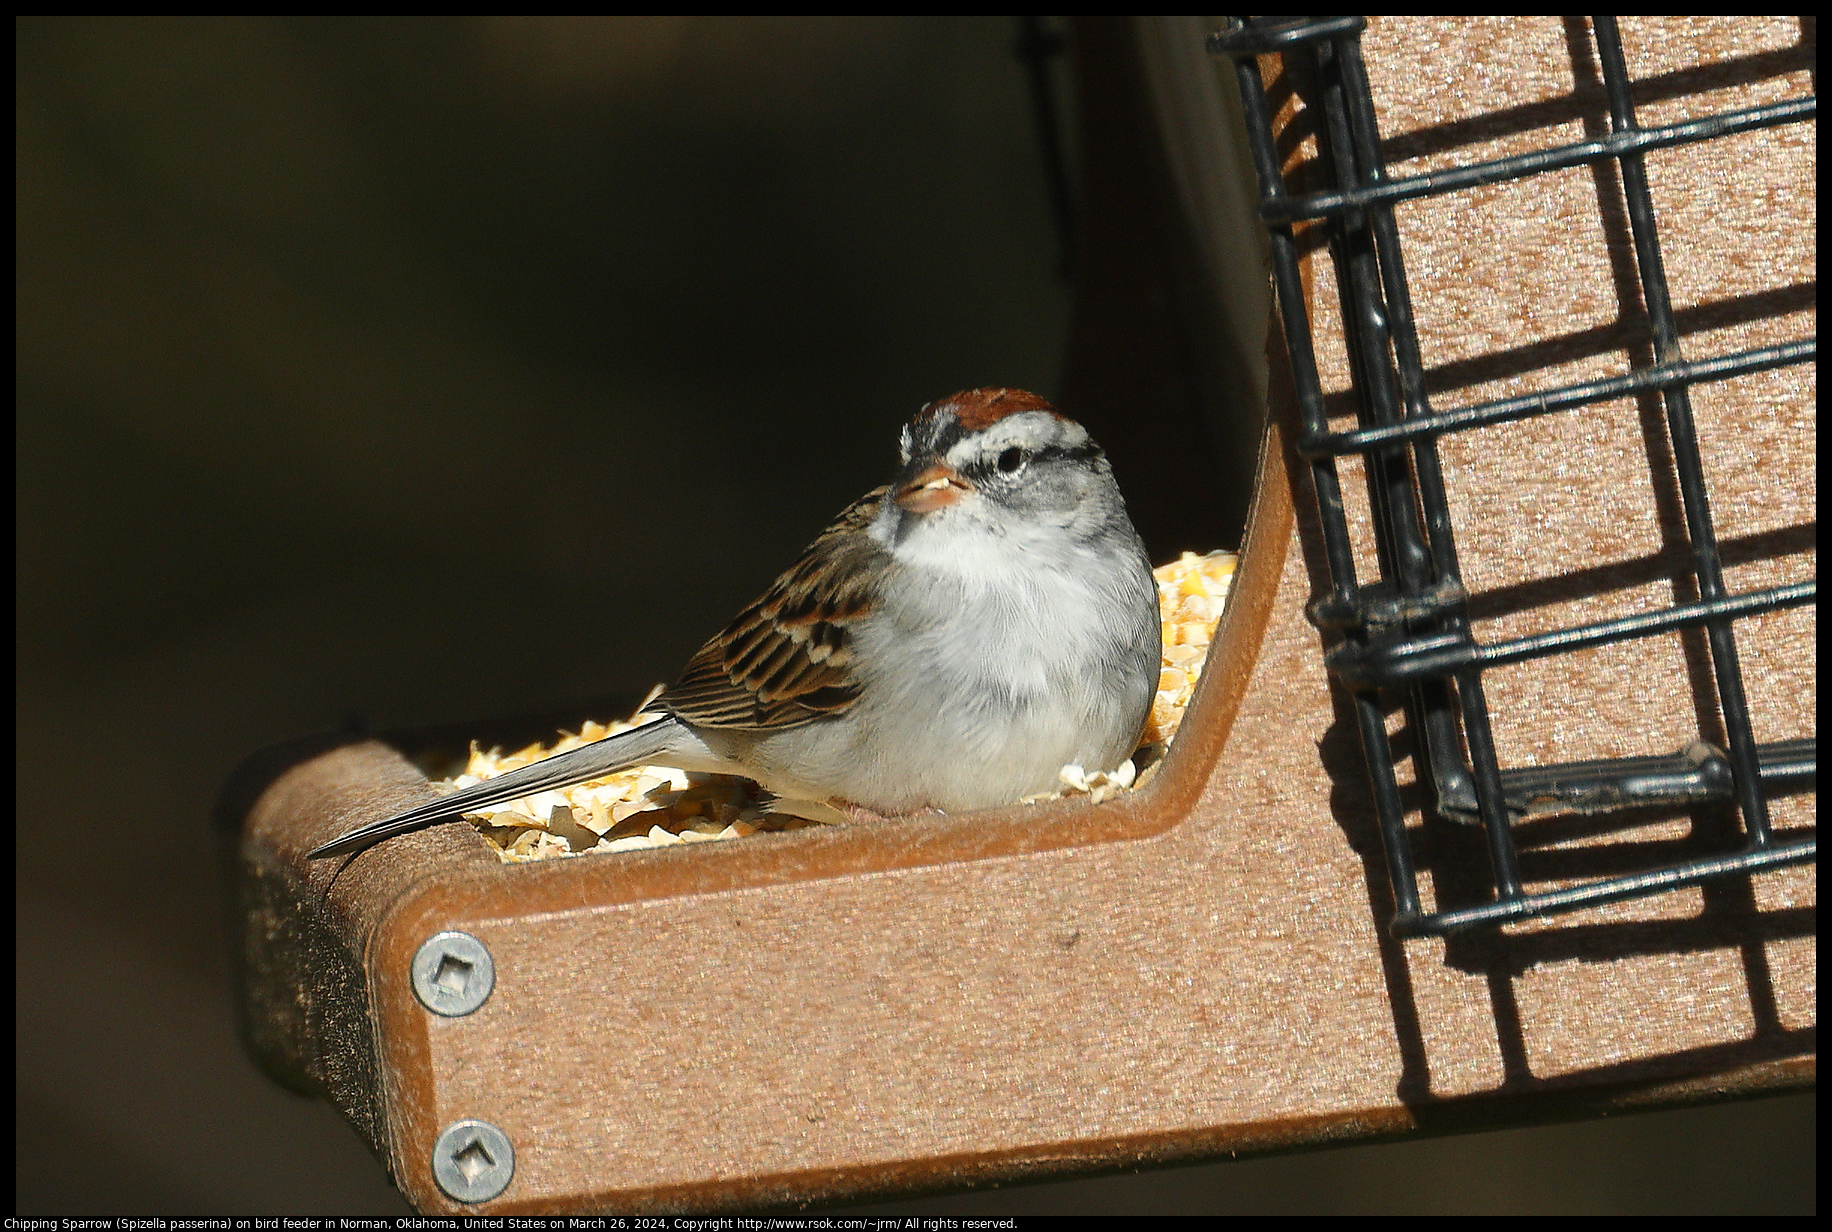 Chipping Sparrow (Spizella passerina) on bird feeder in Norman, Oklahoma, United States on March 26, 2024